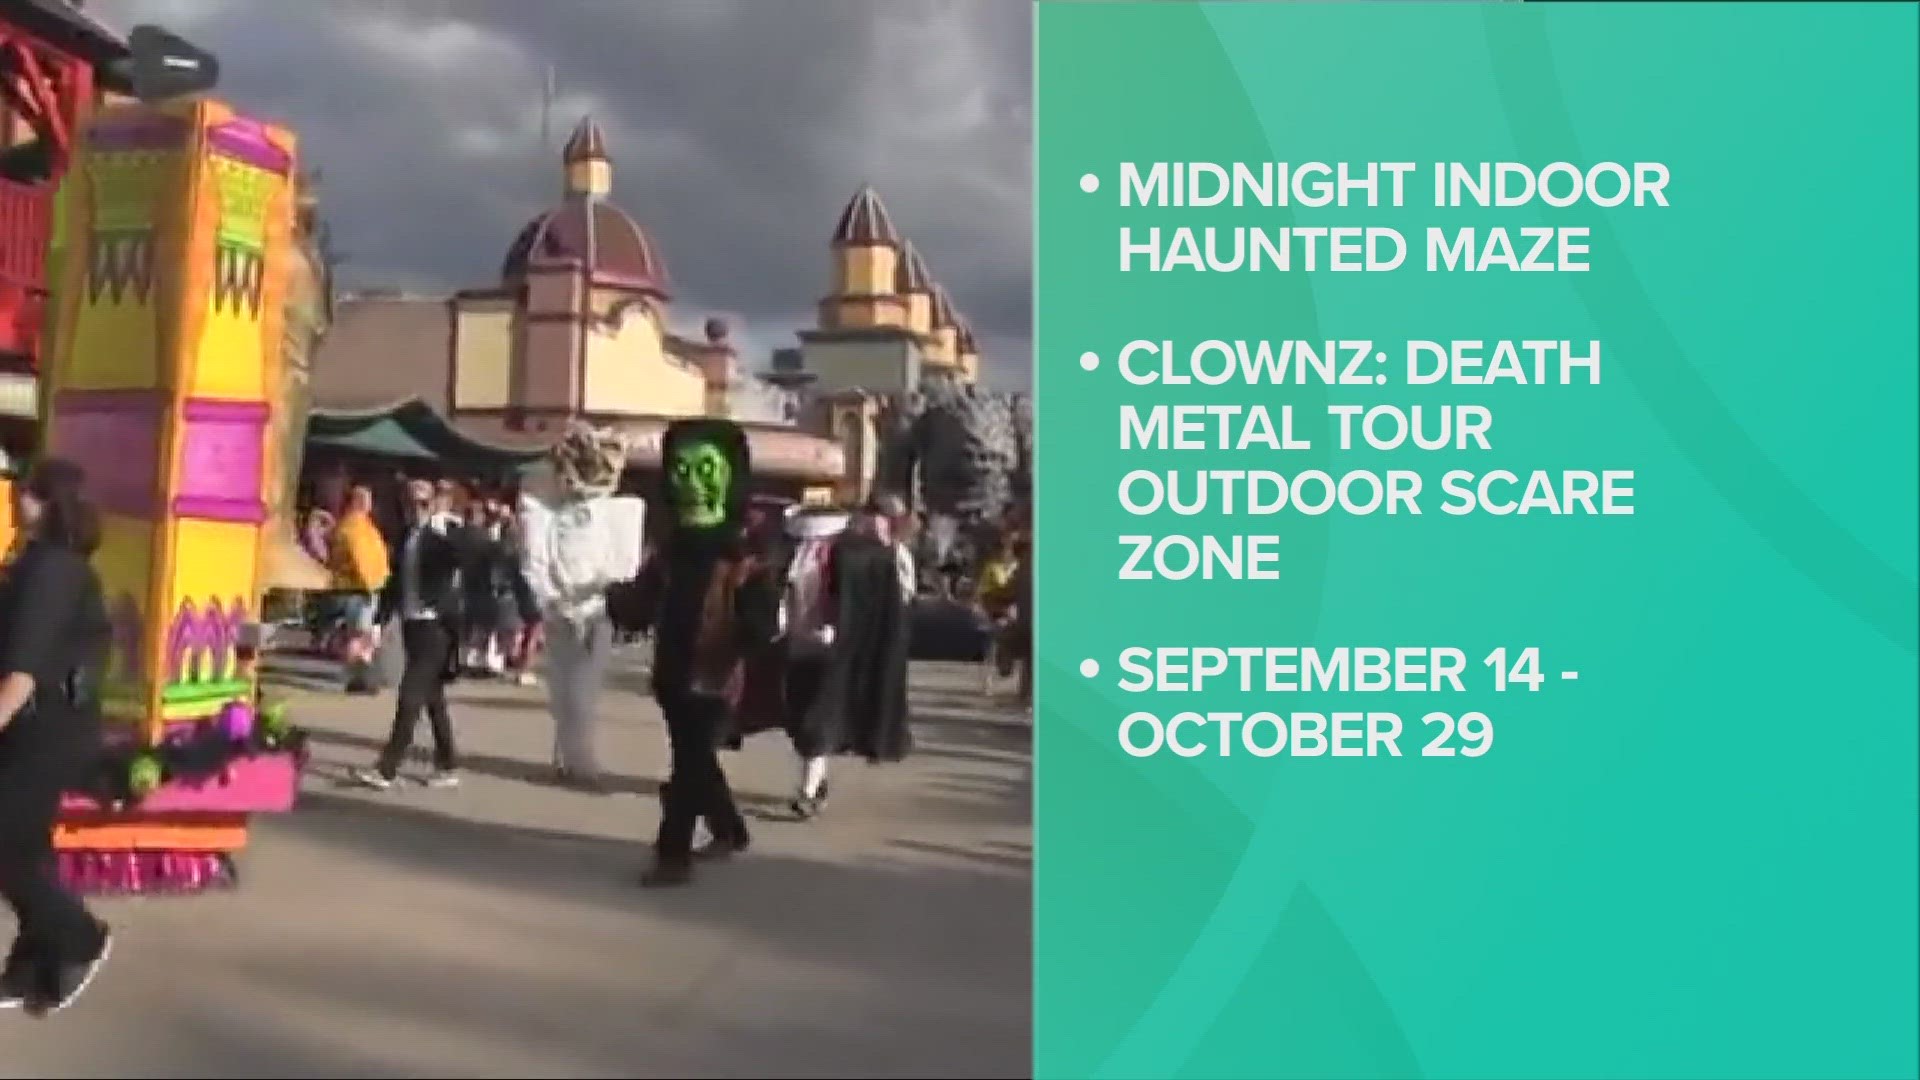 New for 2023 are the Midnight indoor haunted maze and Clownz: Death Metal Tour outdoor scare zone.